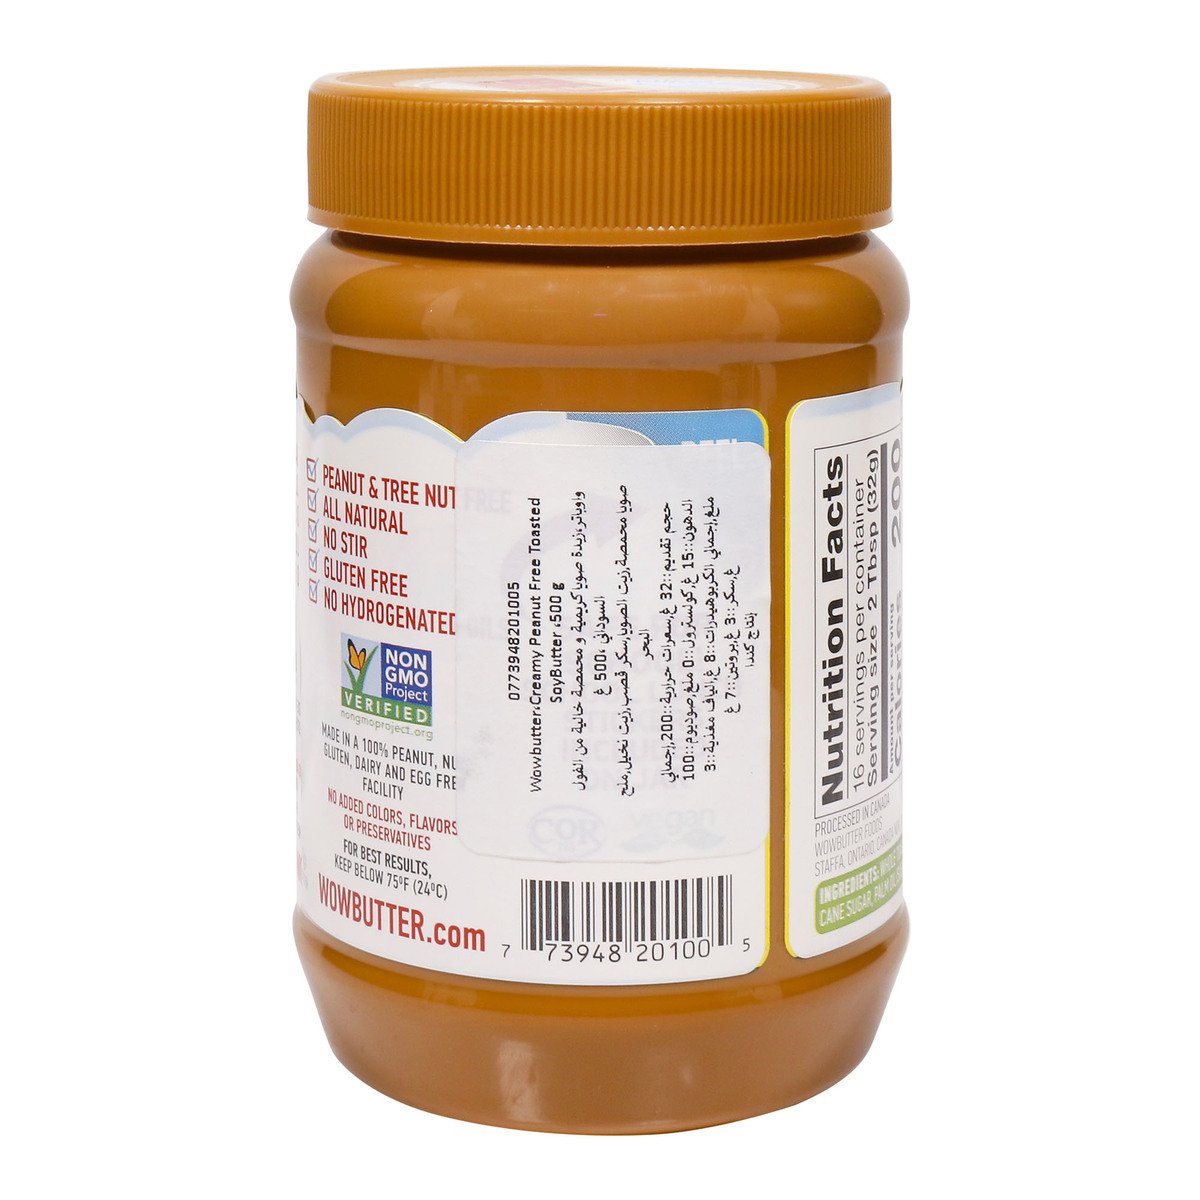 Wow Butter Creamy Toasted Soy Spread Gluten Free 500 g